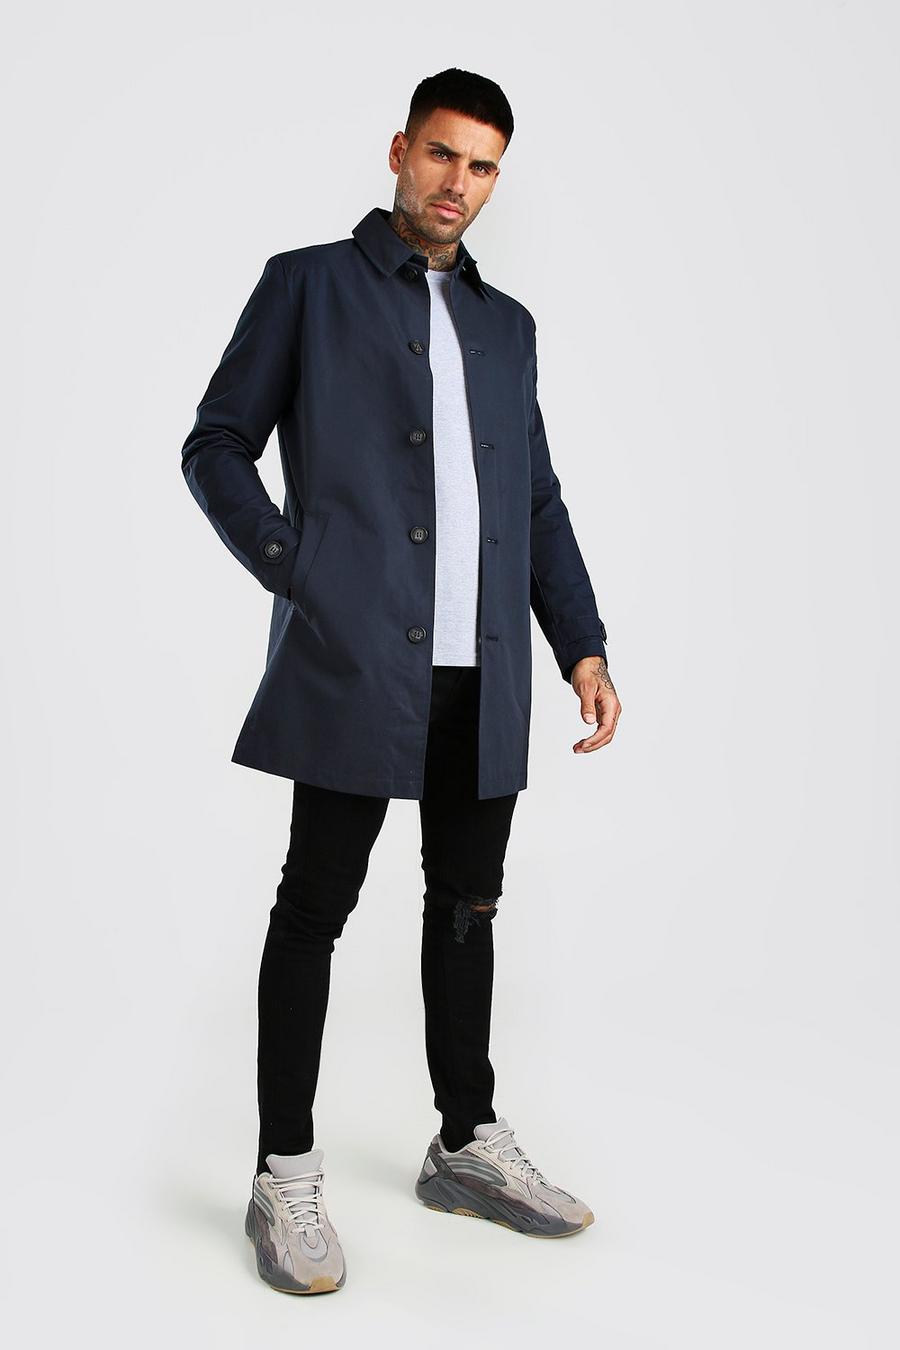 Impermeabile Smart a monopetto stile Trench, Navy blu oltremare